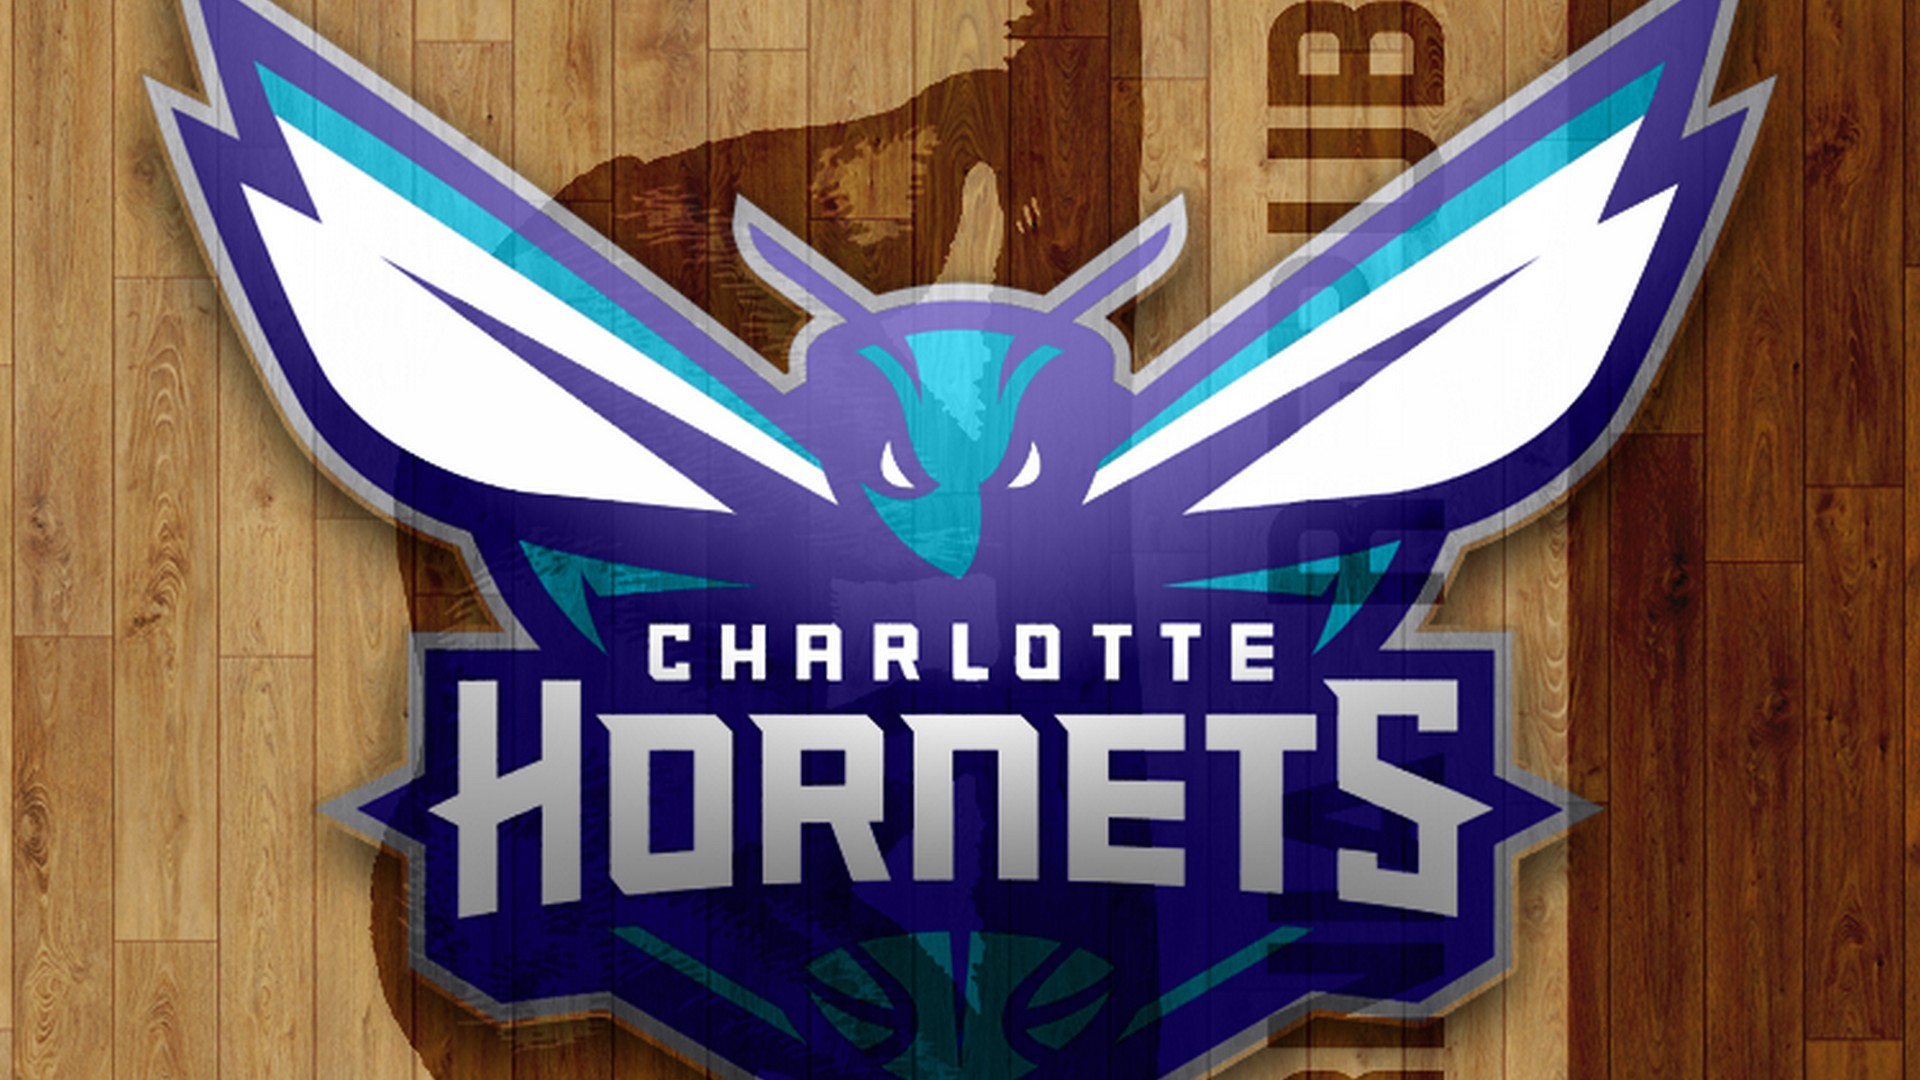 Wallpaper Desktop Charlotte Hornets HD with high-resolution 1920x1080 pixel. You can use this wallpaper for your Desktop Computer Backgrounds, Windows or Mac Screensavers, iPhone Lock screen, Tablet or Android and another Mobile Phone device